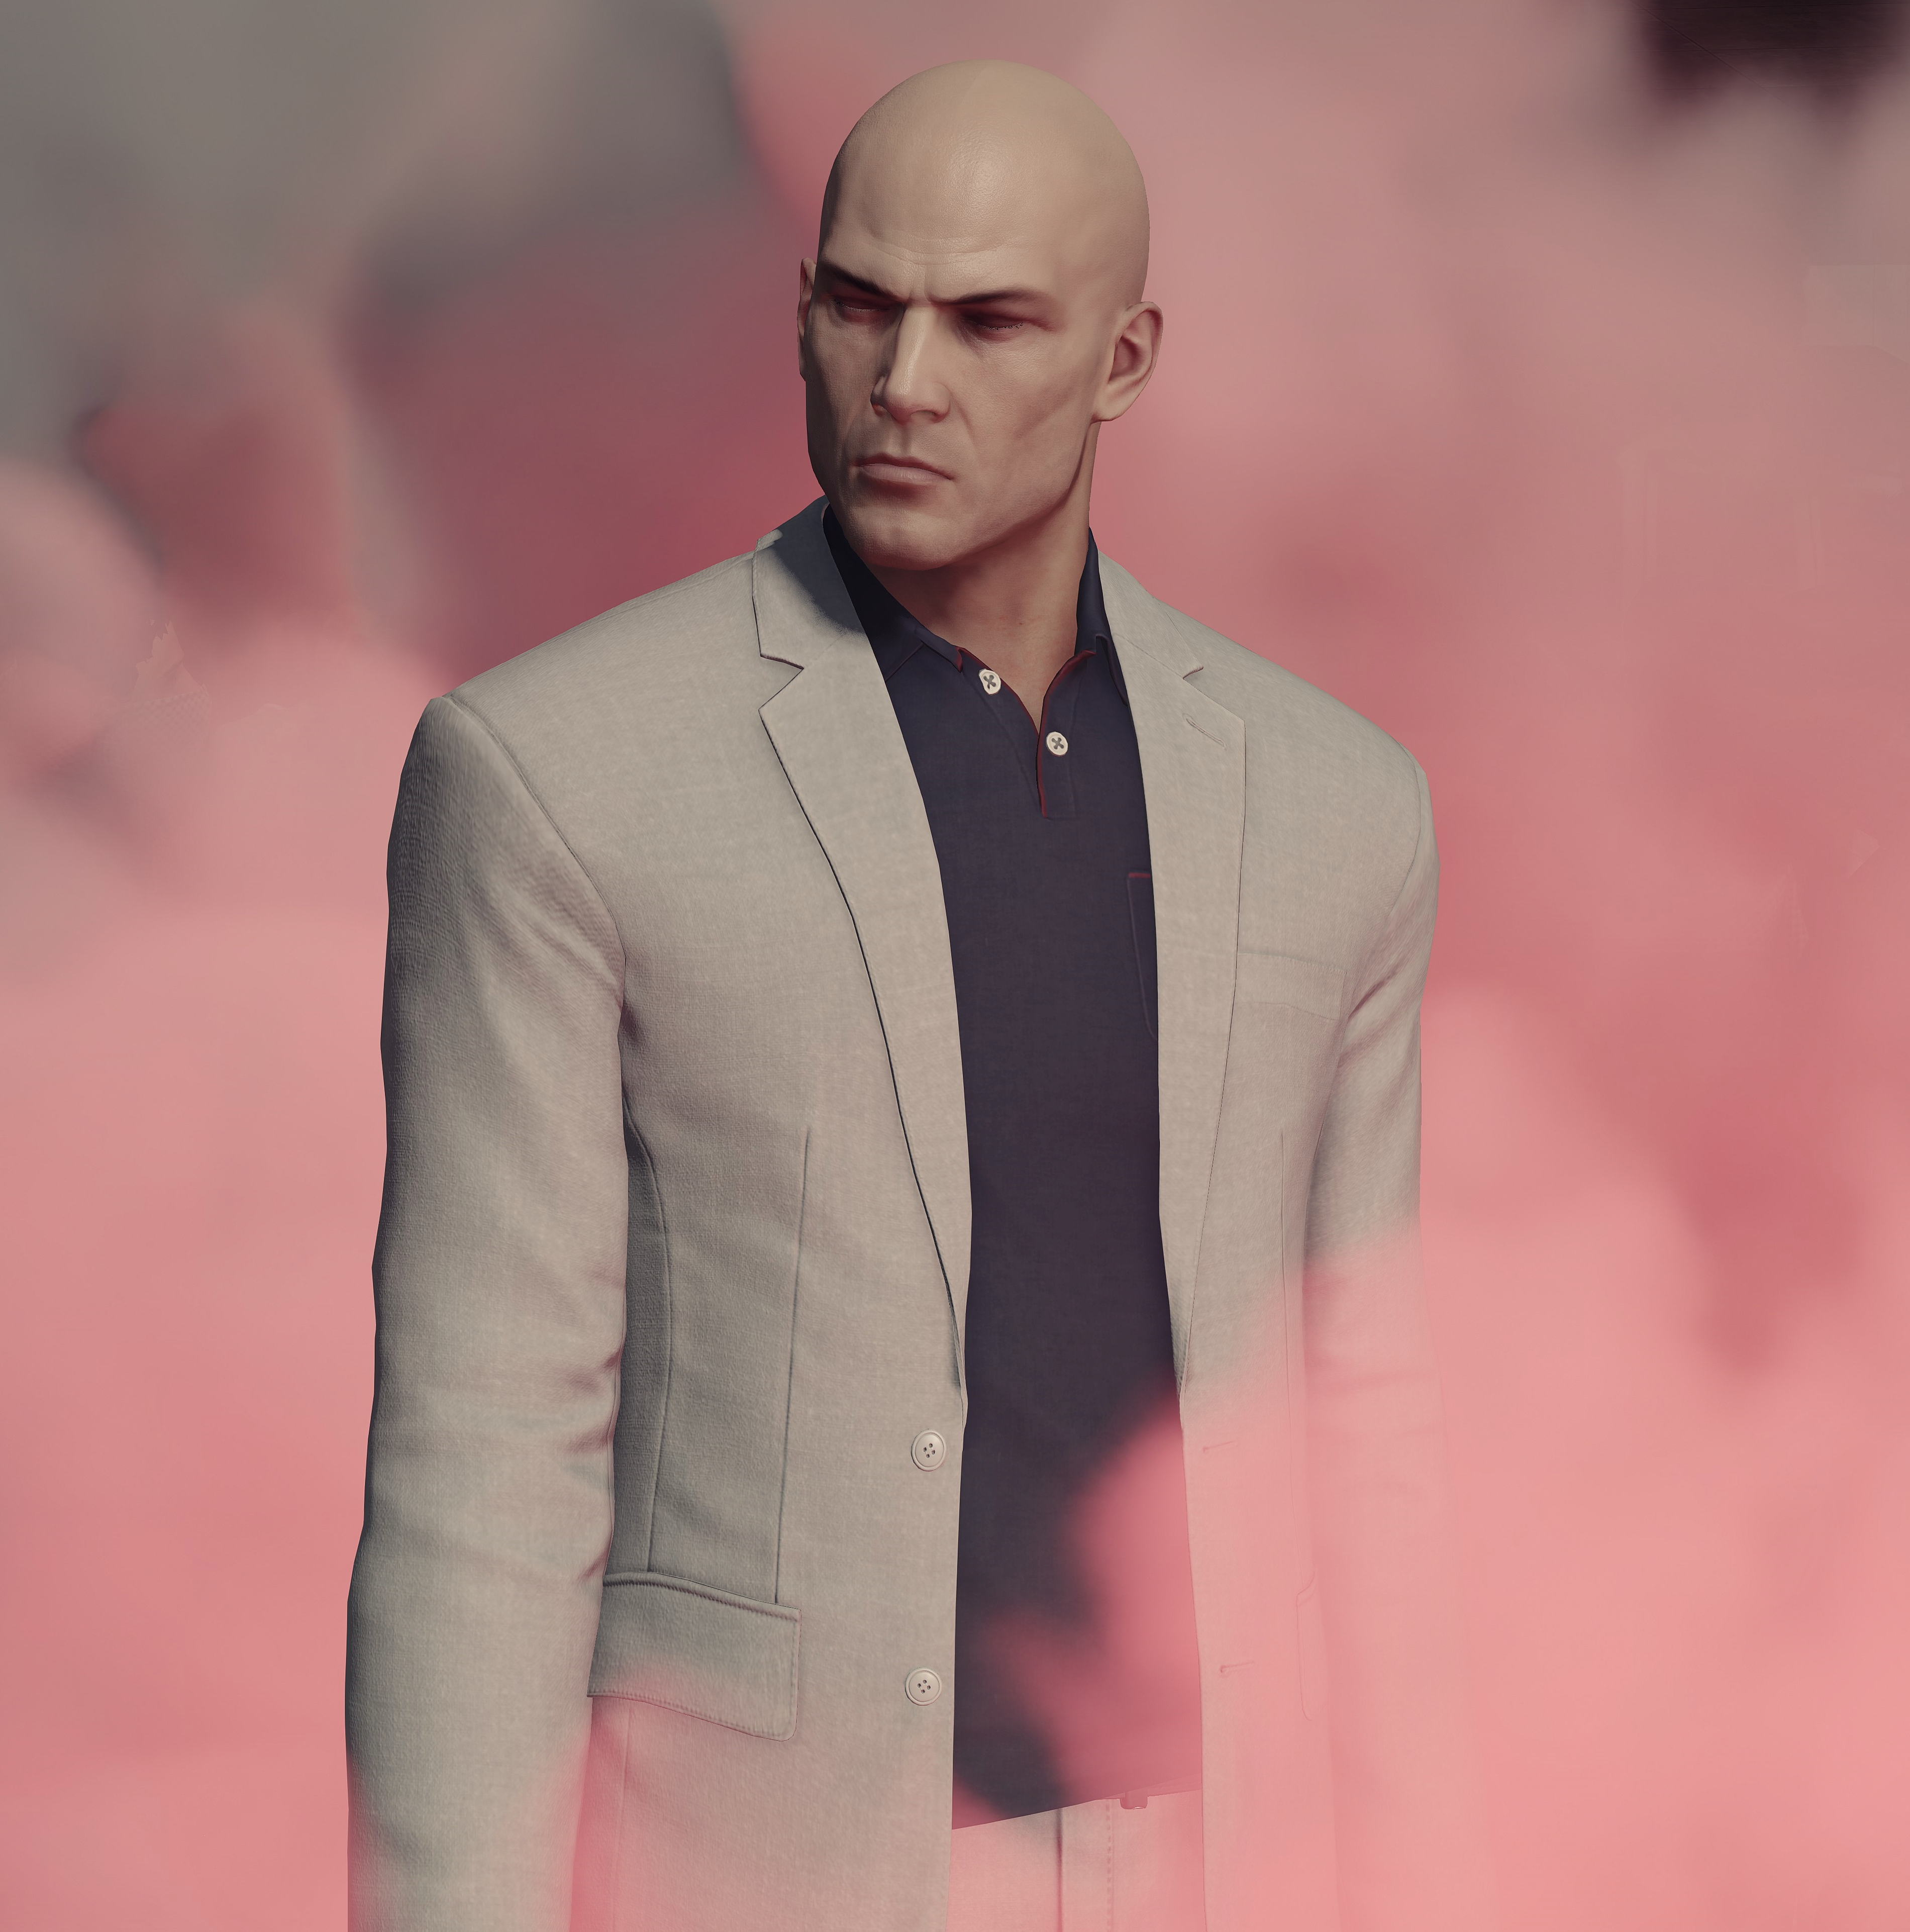 Hitman The Full Experience Art by HodgeDogs